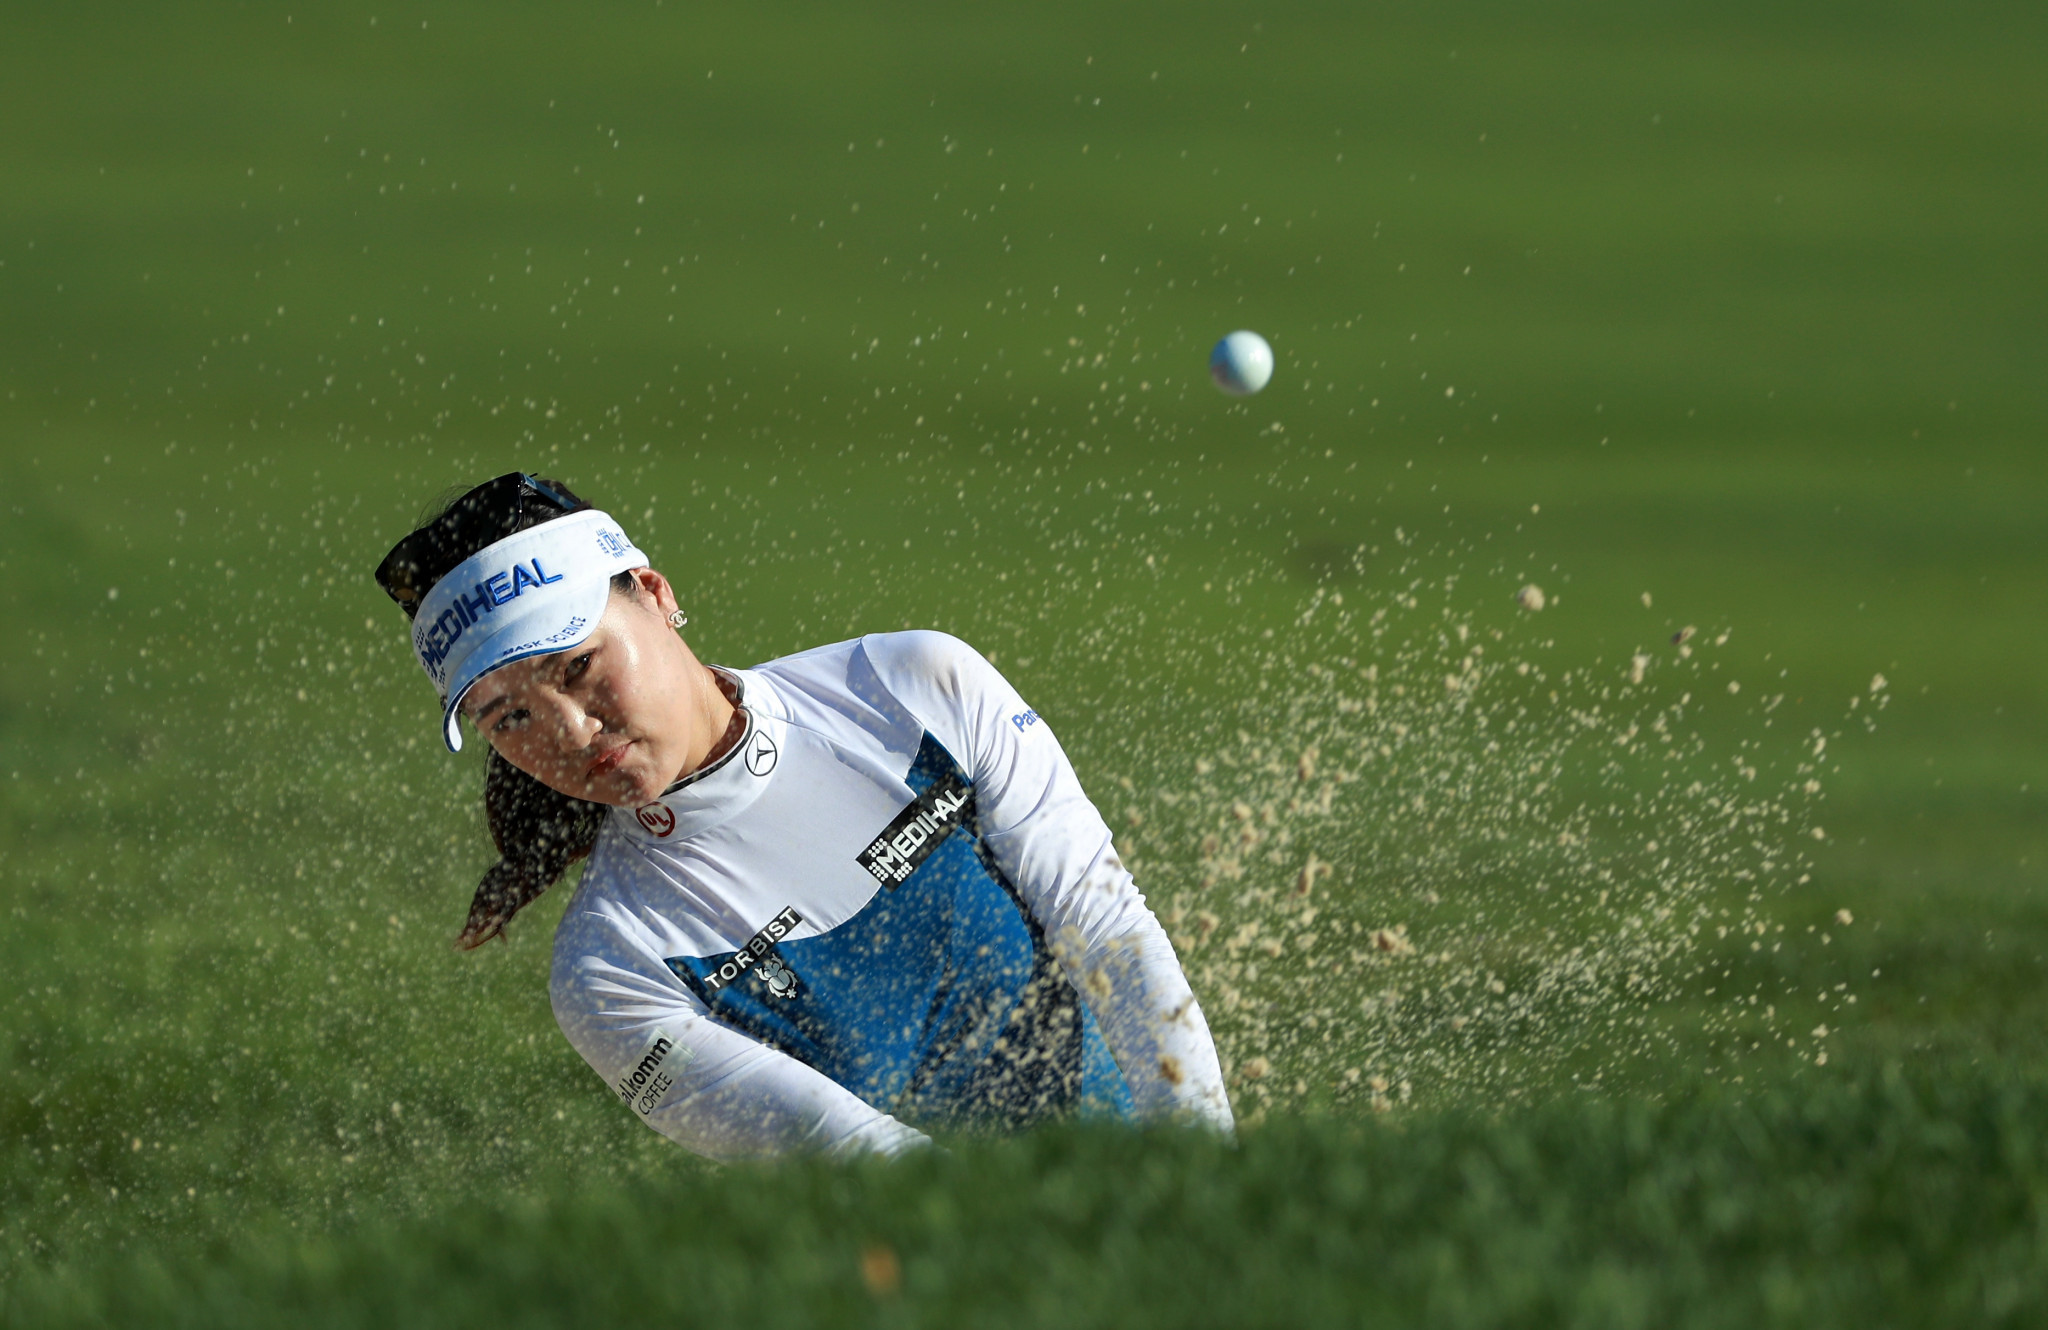 Three-way tie for lead after day two of Women's PGA Championship